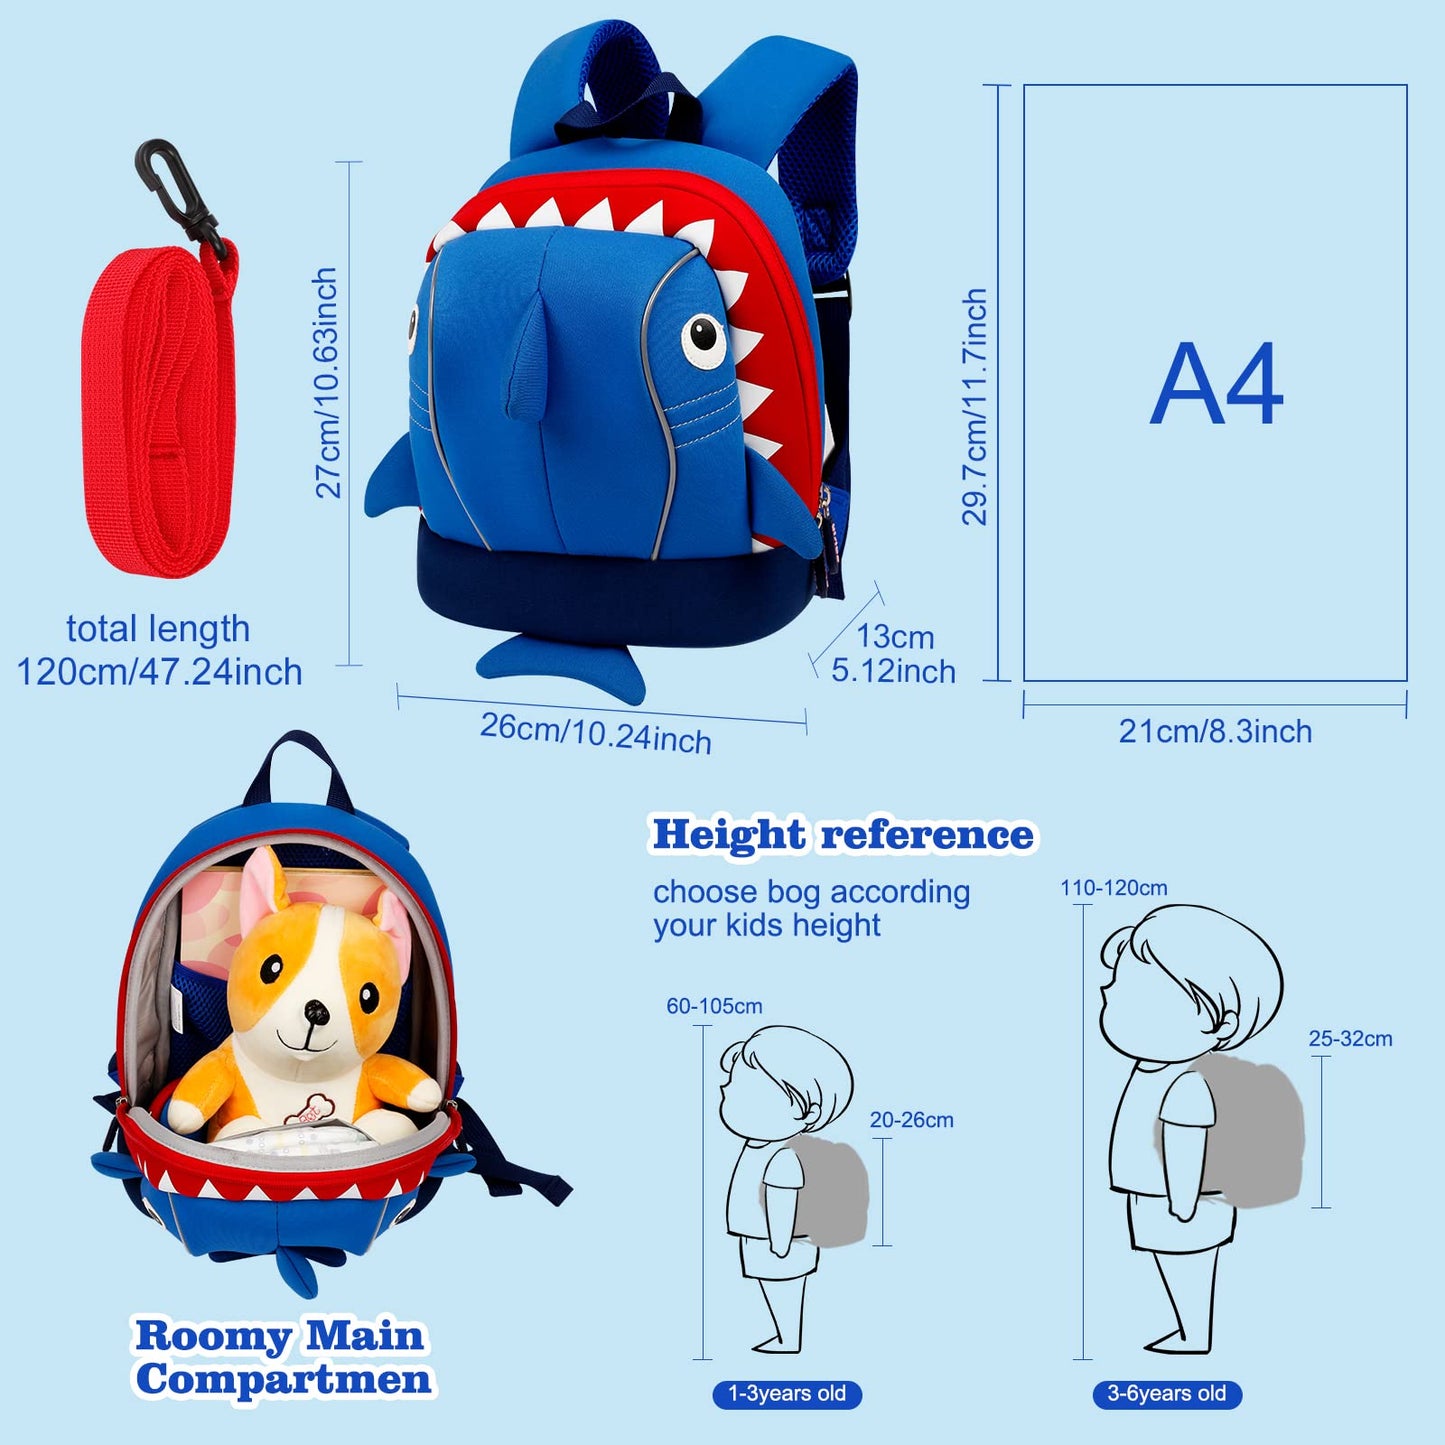 yisibo Kids Backpack with Safety Leash,Anti-lost Children Toddler Backpack for Boys Girls Baby